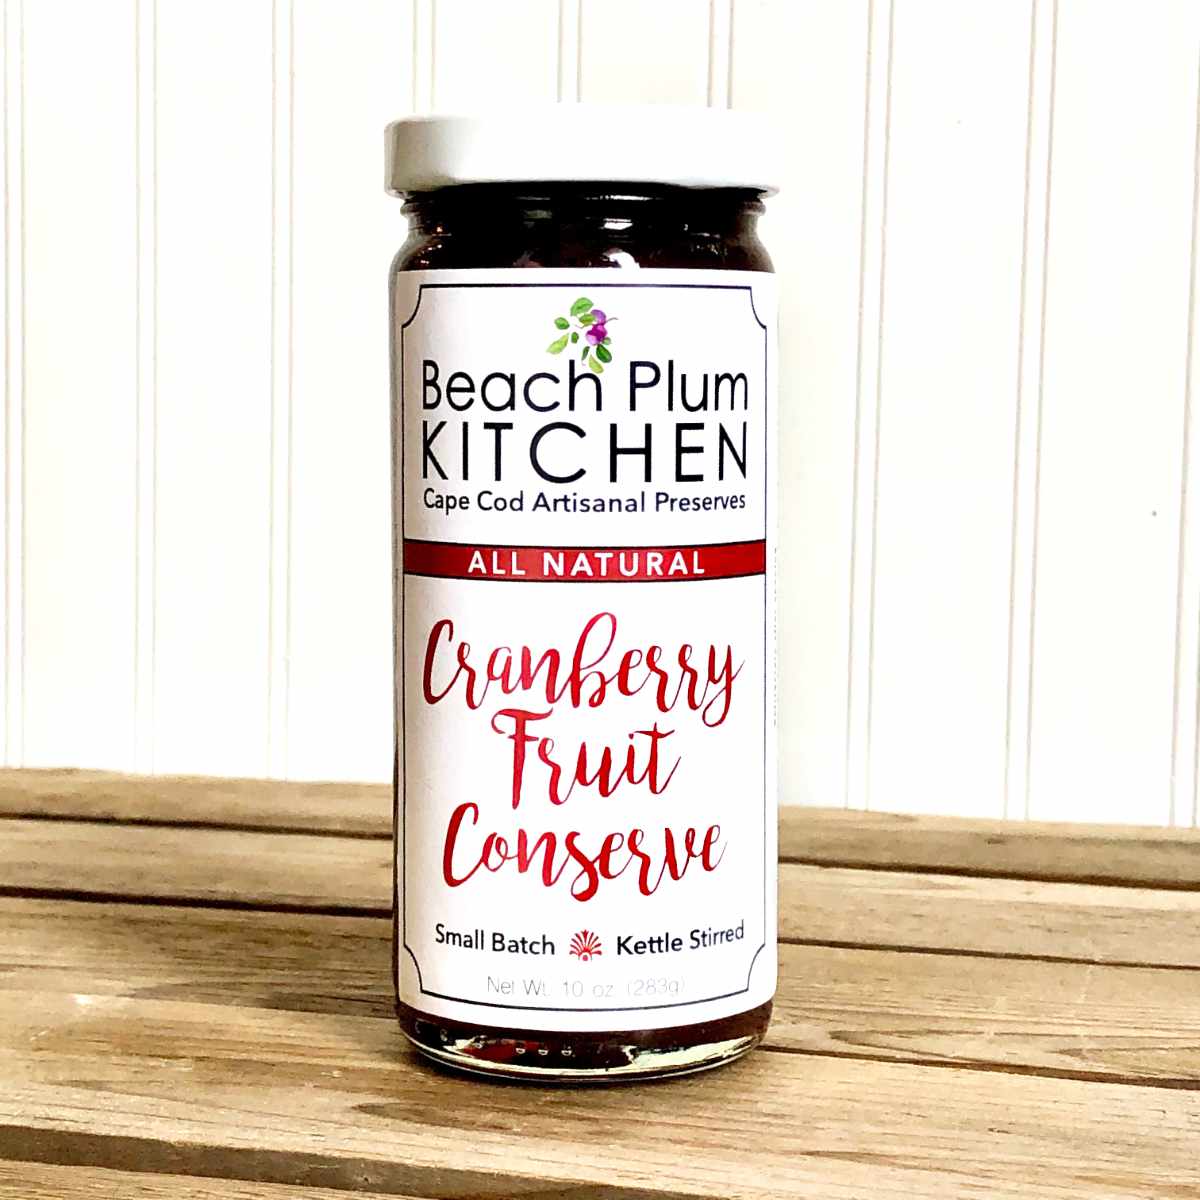 Cape Cod's Beach Plum Kitchen makes their signature amazing, artisanal Cranberry Pepper Jelly with all natural, non-gmo ingredients.